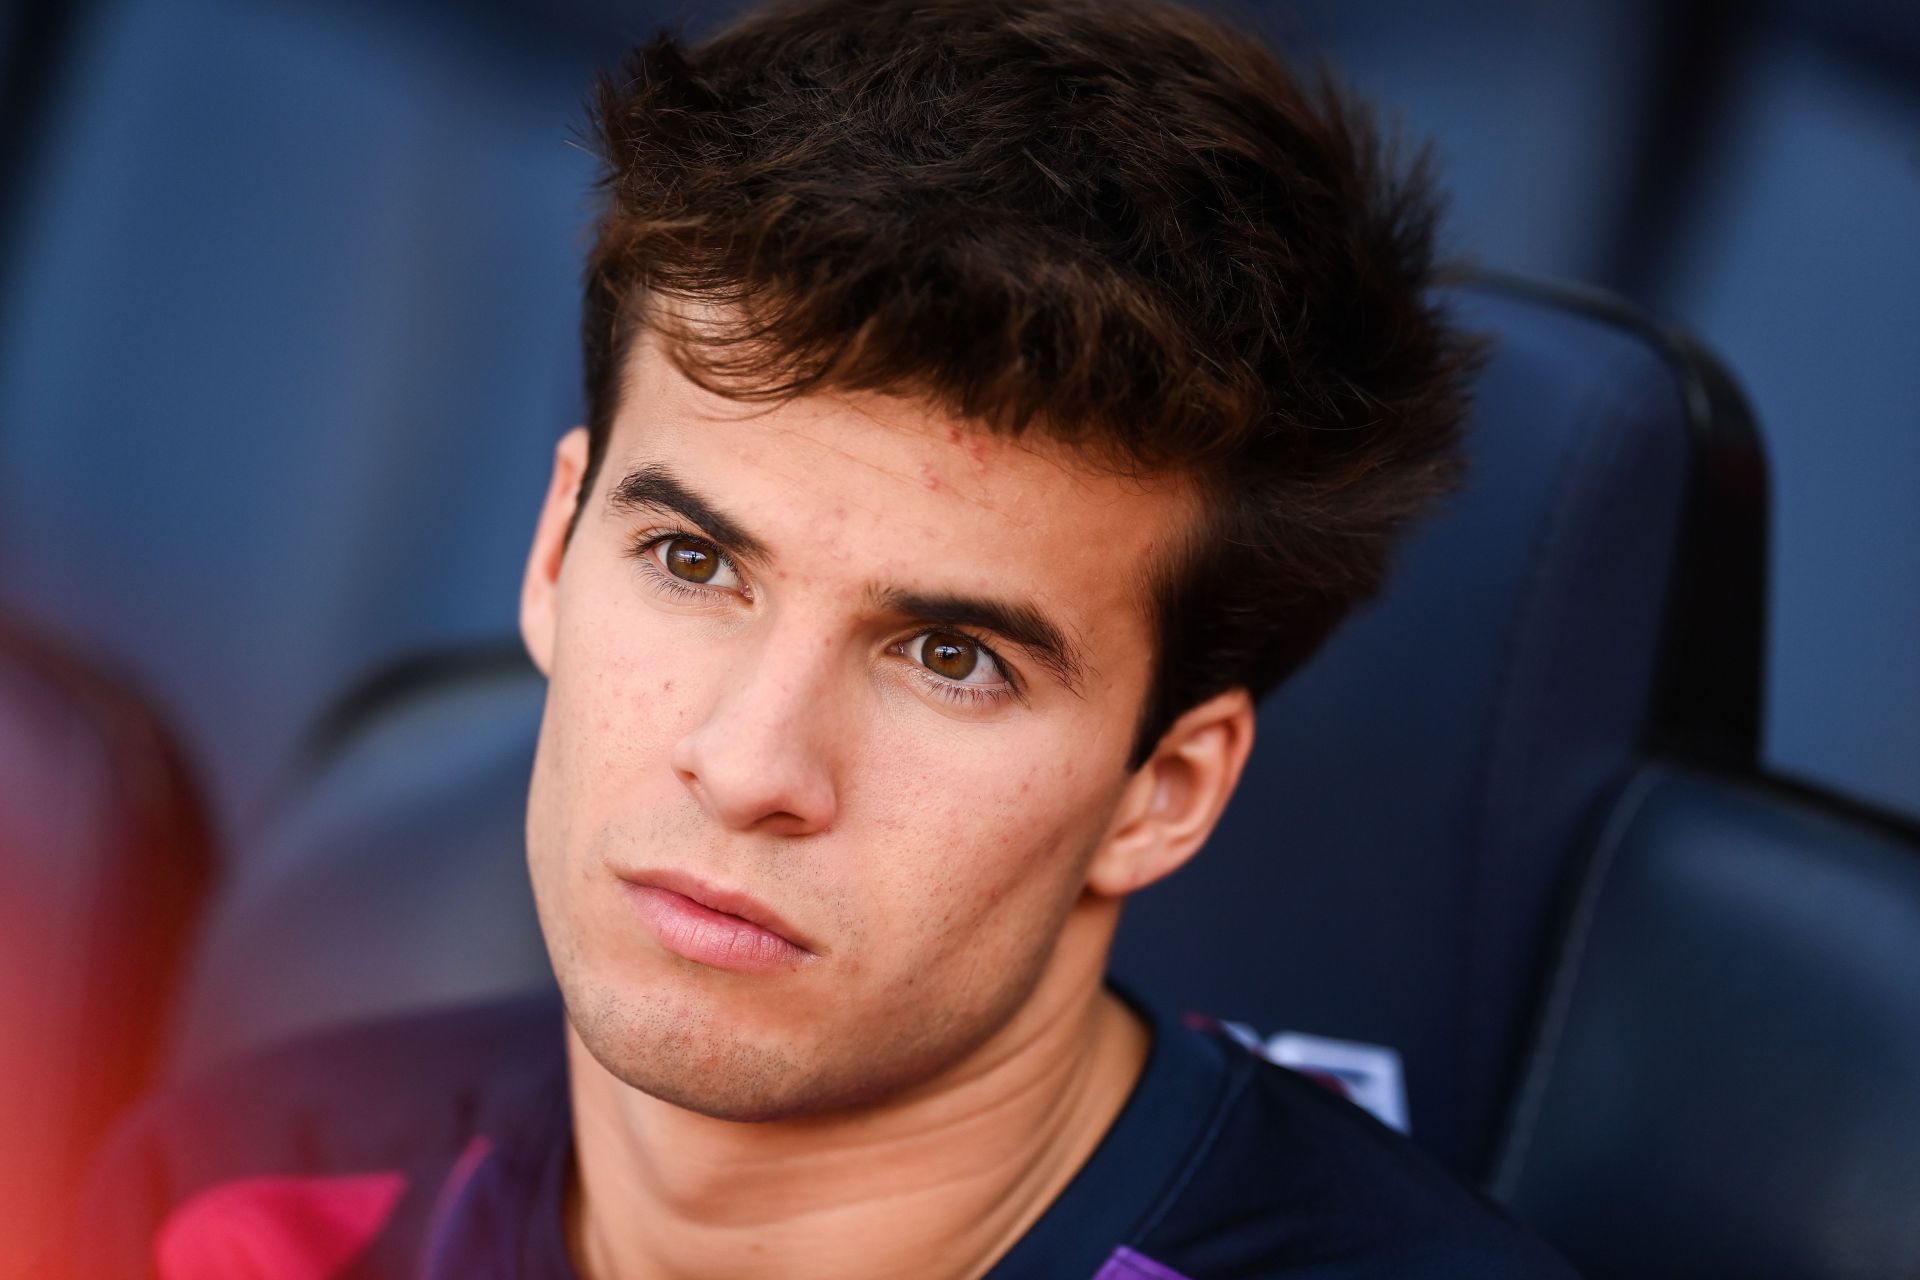 Riqui Puig could be on his way out of the Camp Nou.